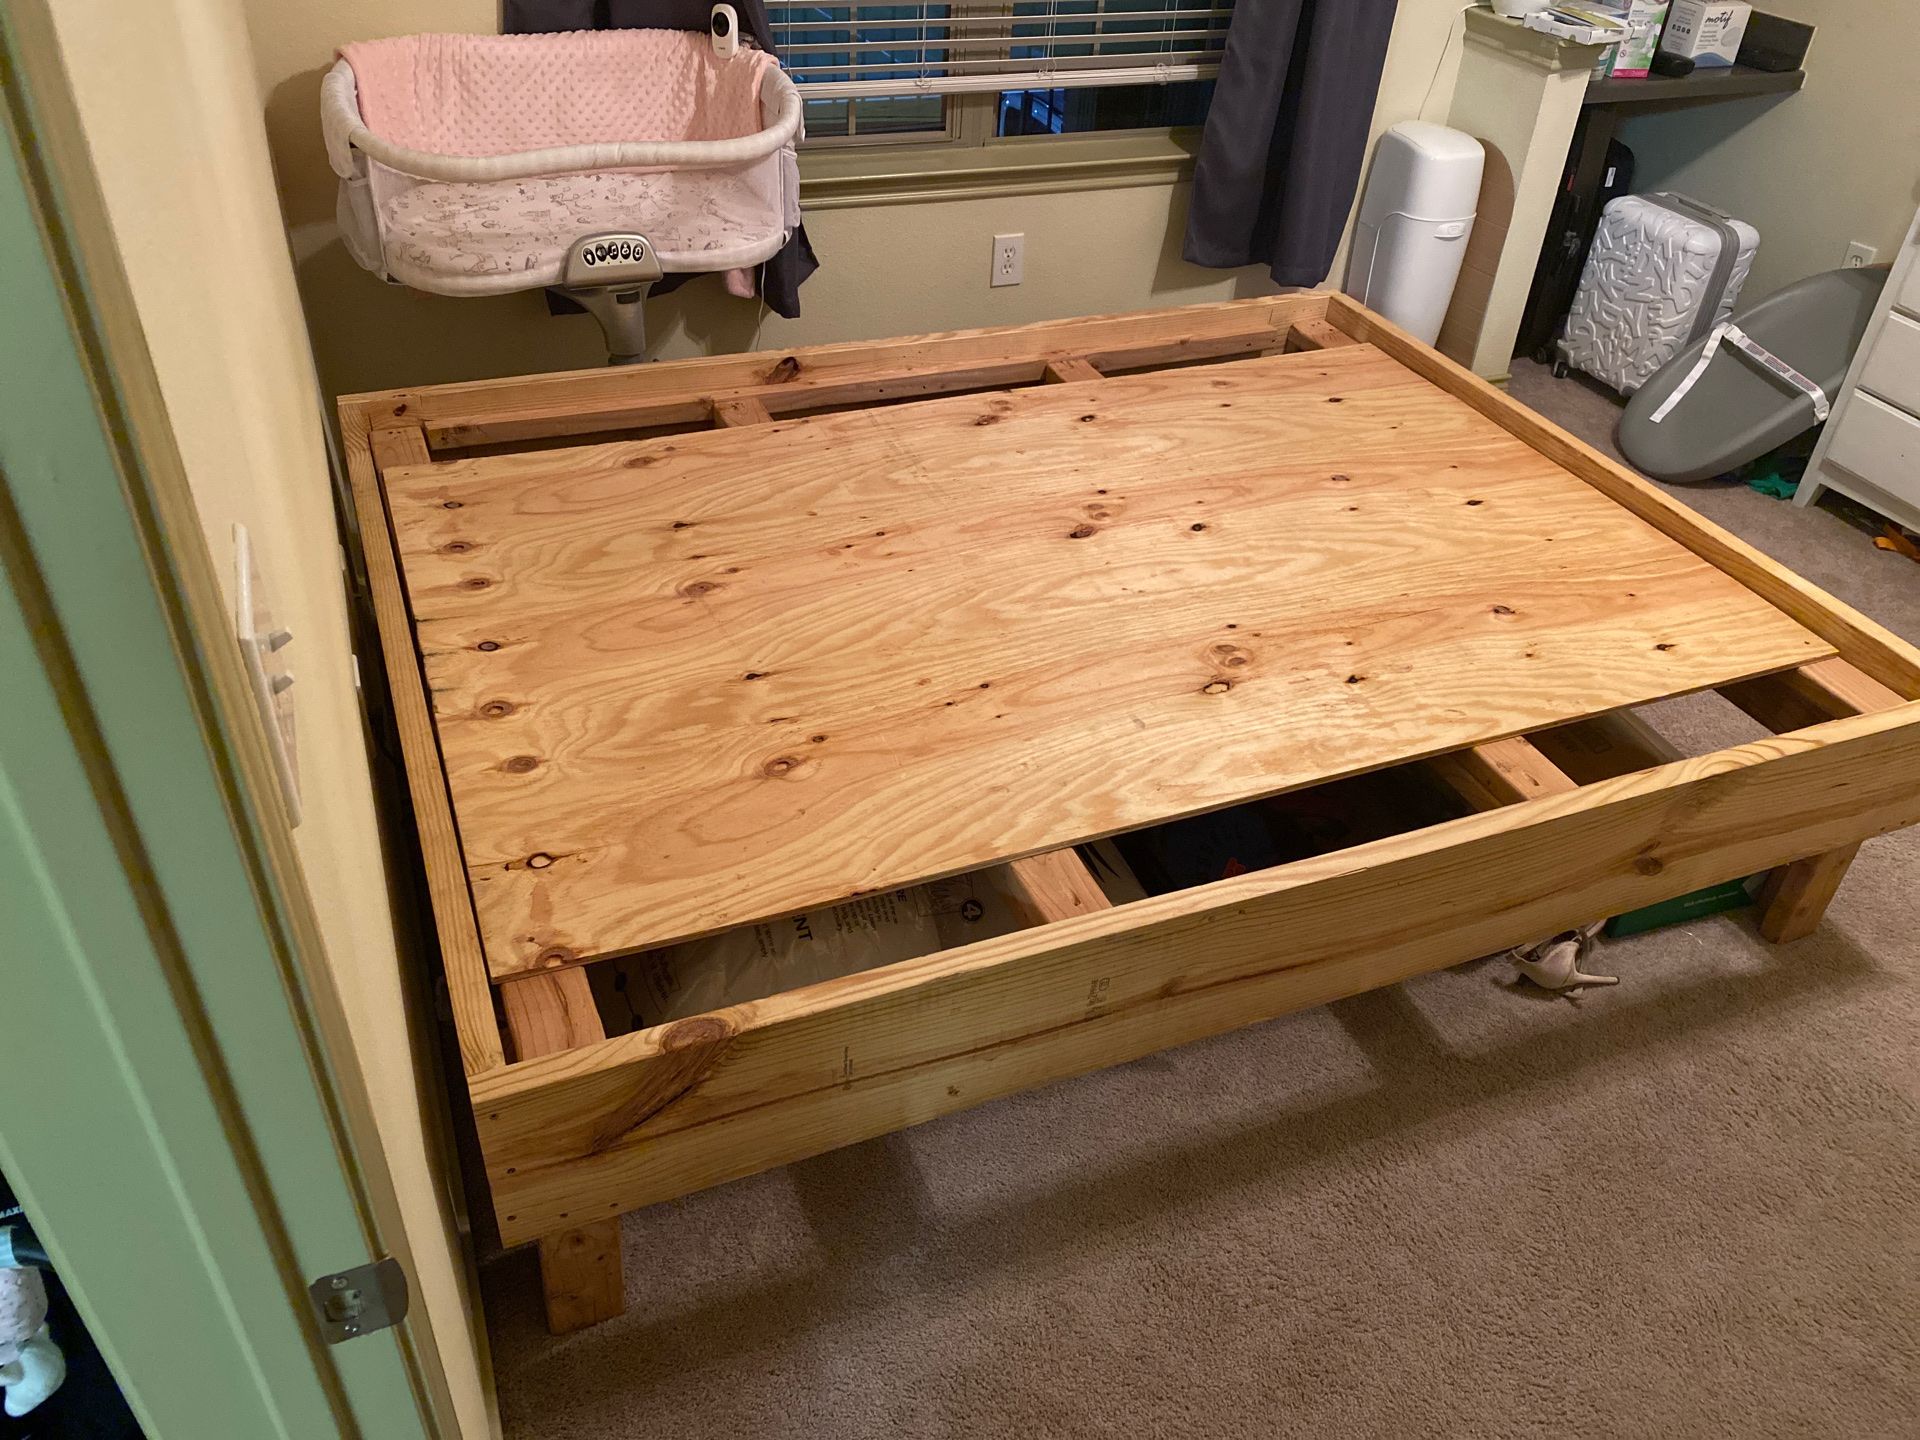 Queen bed frame really heavy and extremely sturdy